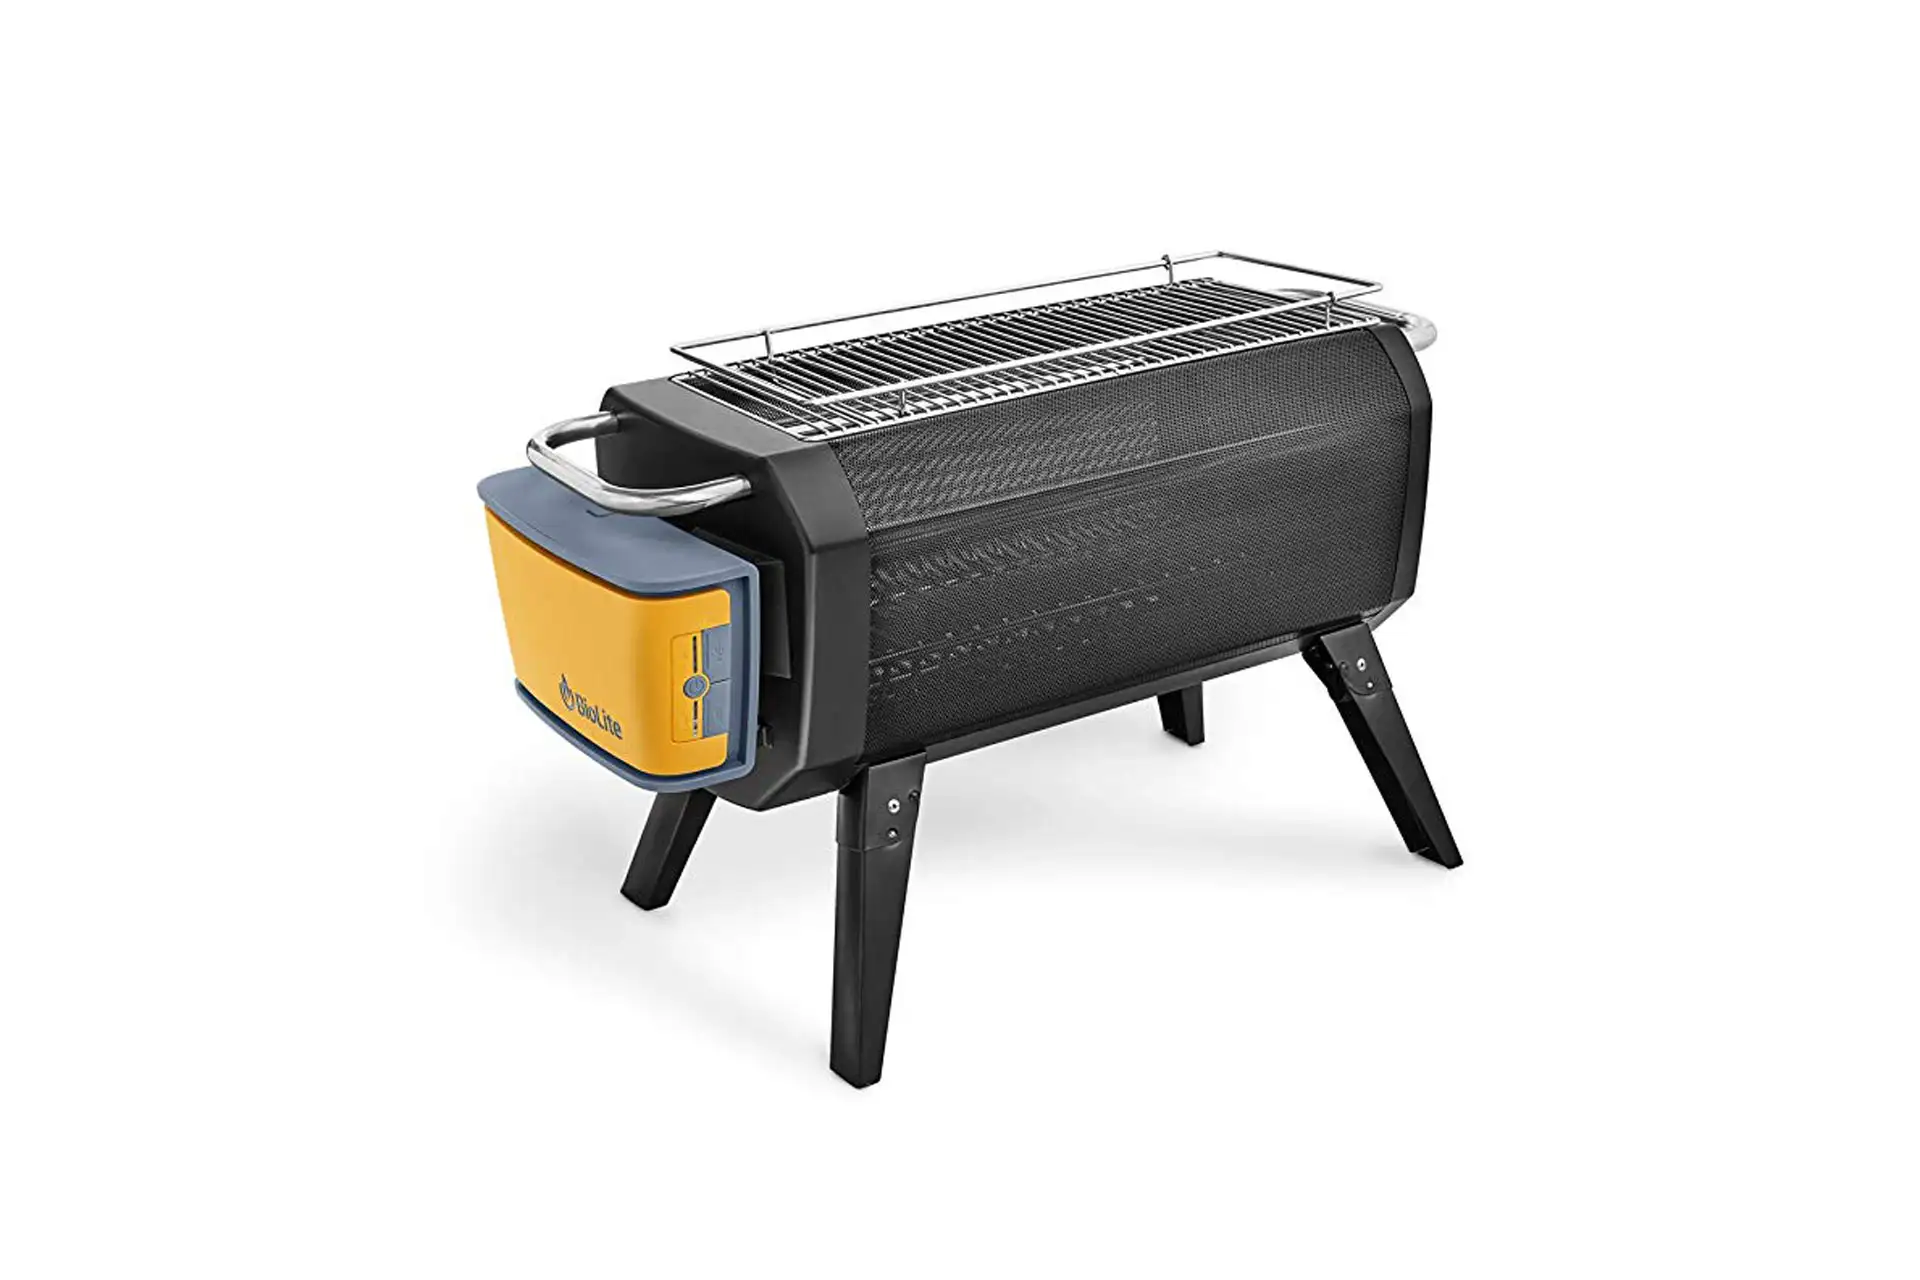 BioLite FirePit Camping Grill; Courtesy of Amazon